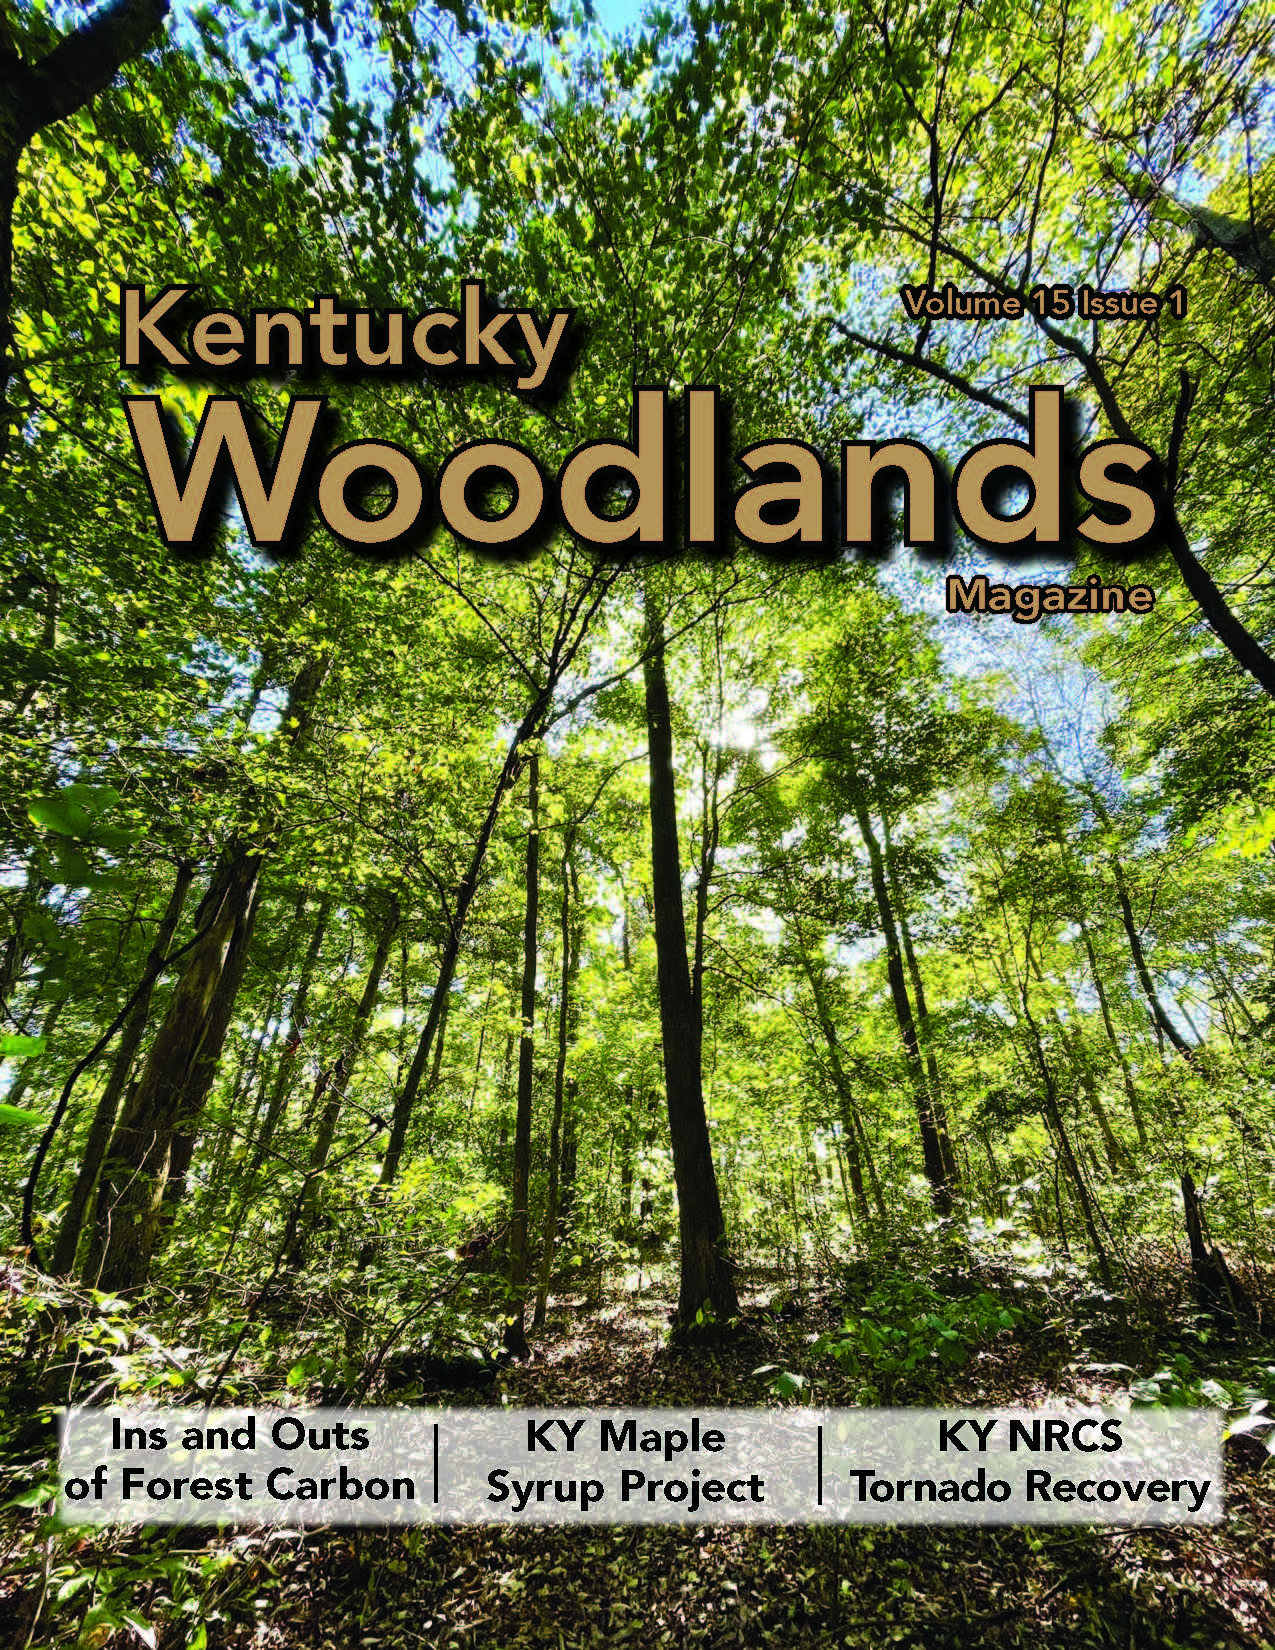 Kentucky Woodlands Magazine, Volume 15, Issue 1 Cover